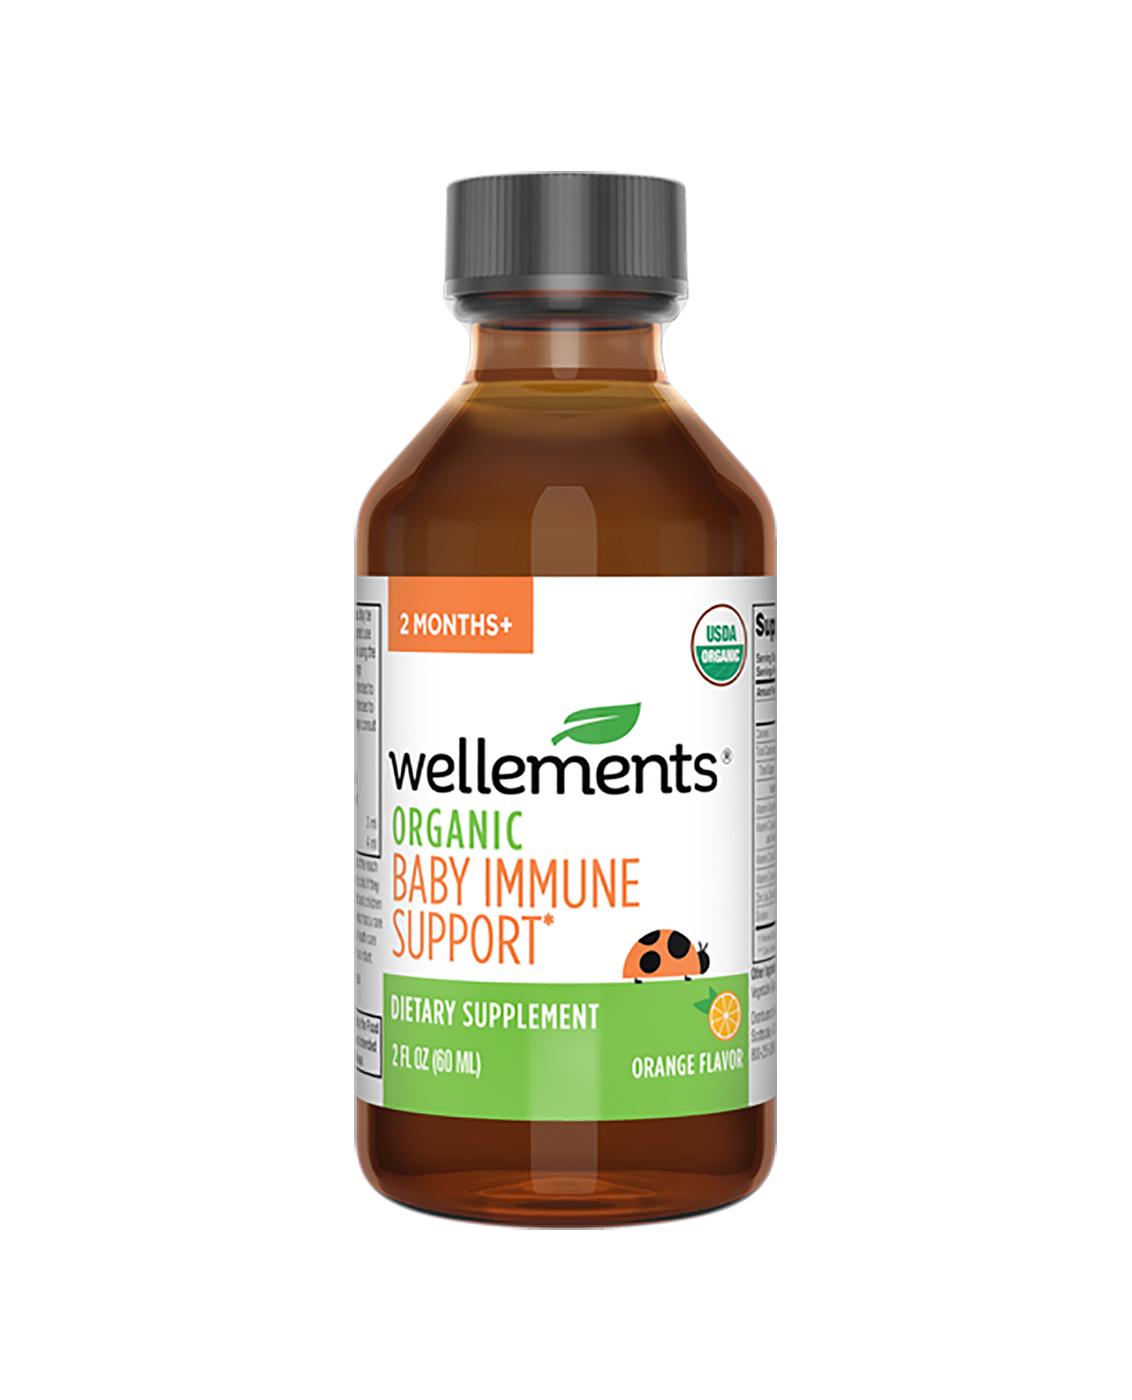 Wellements Organic Baby Immune Support; image 2 of 2